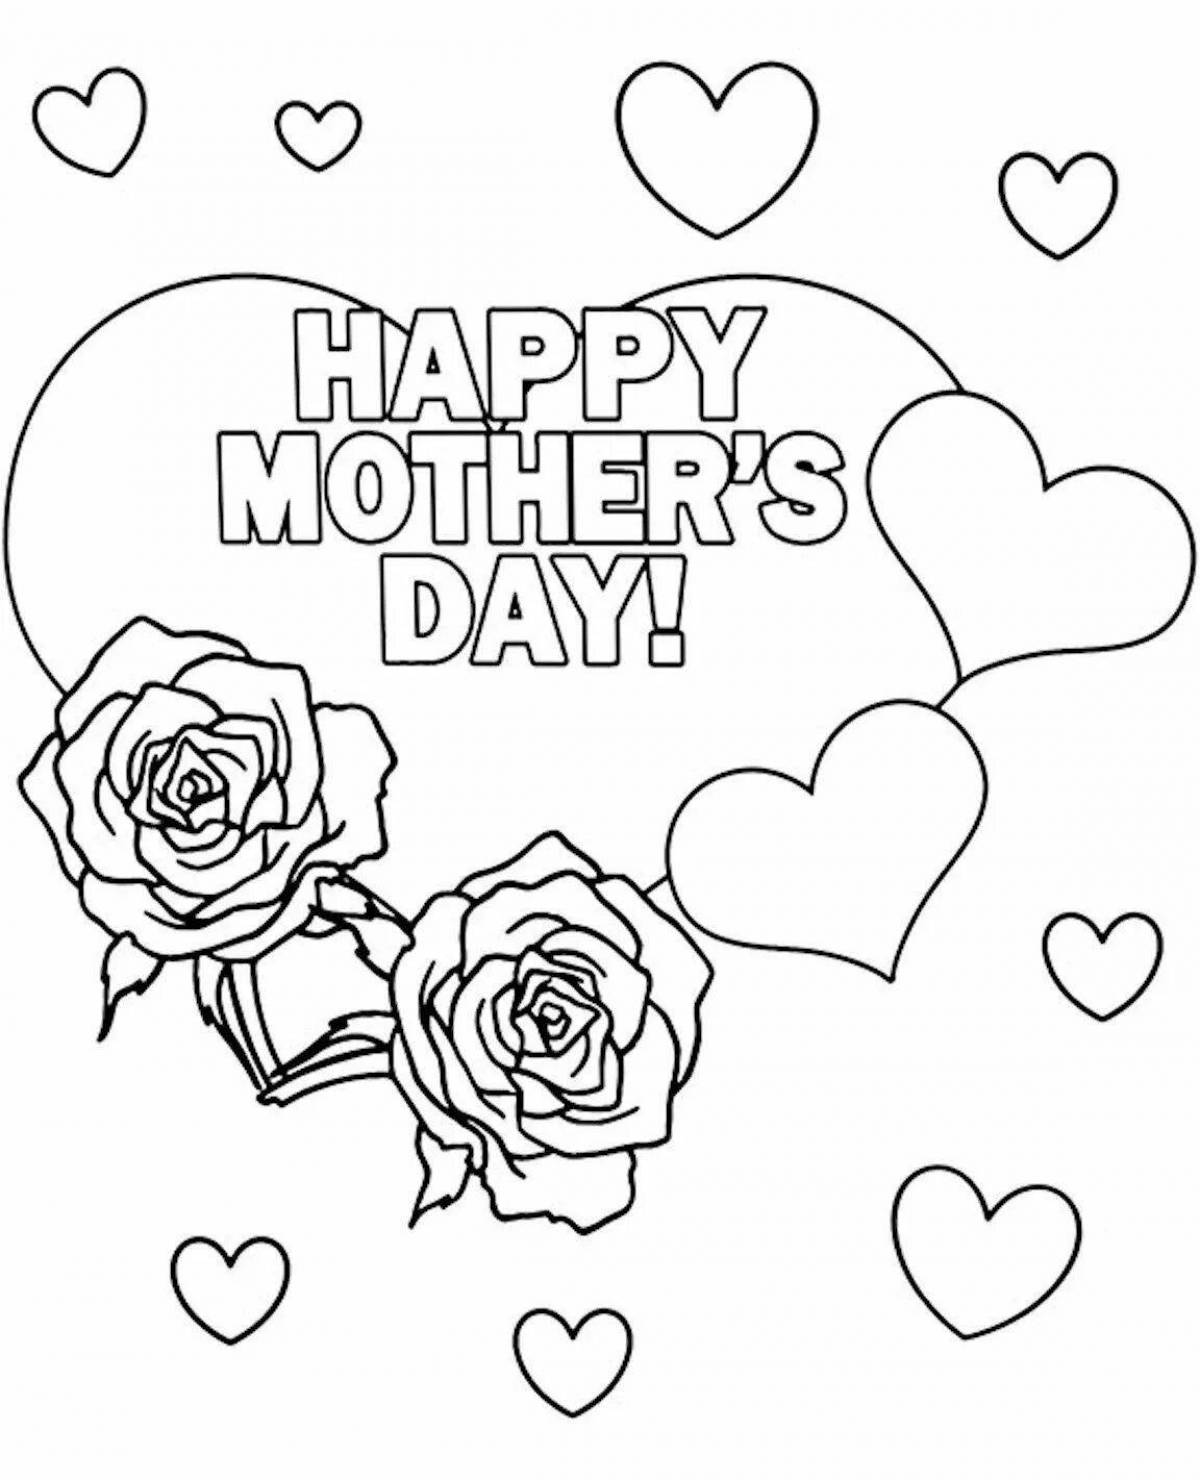 Coloring page patient mom